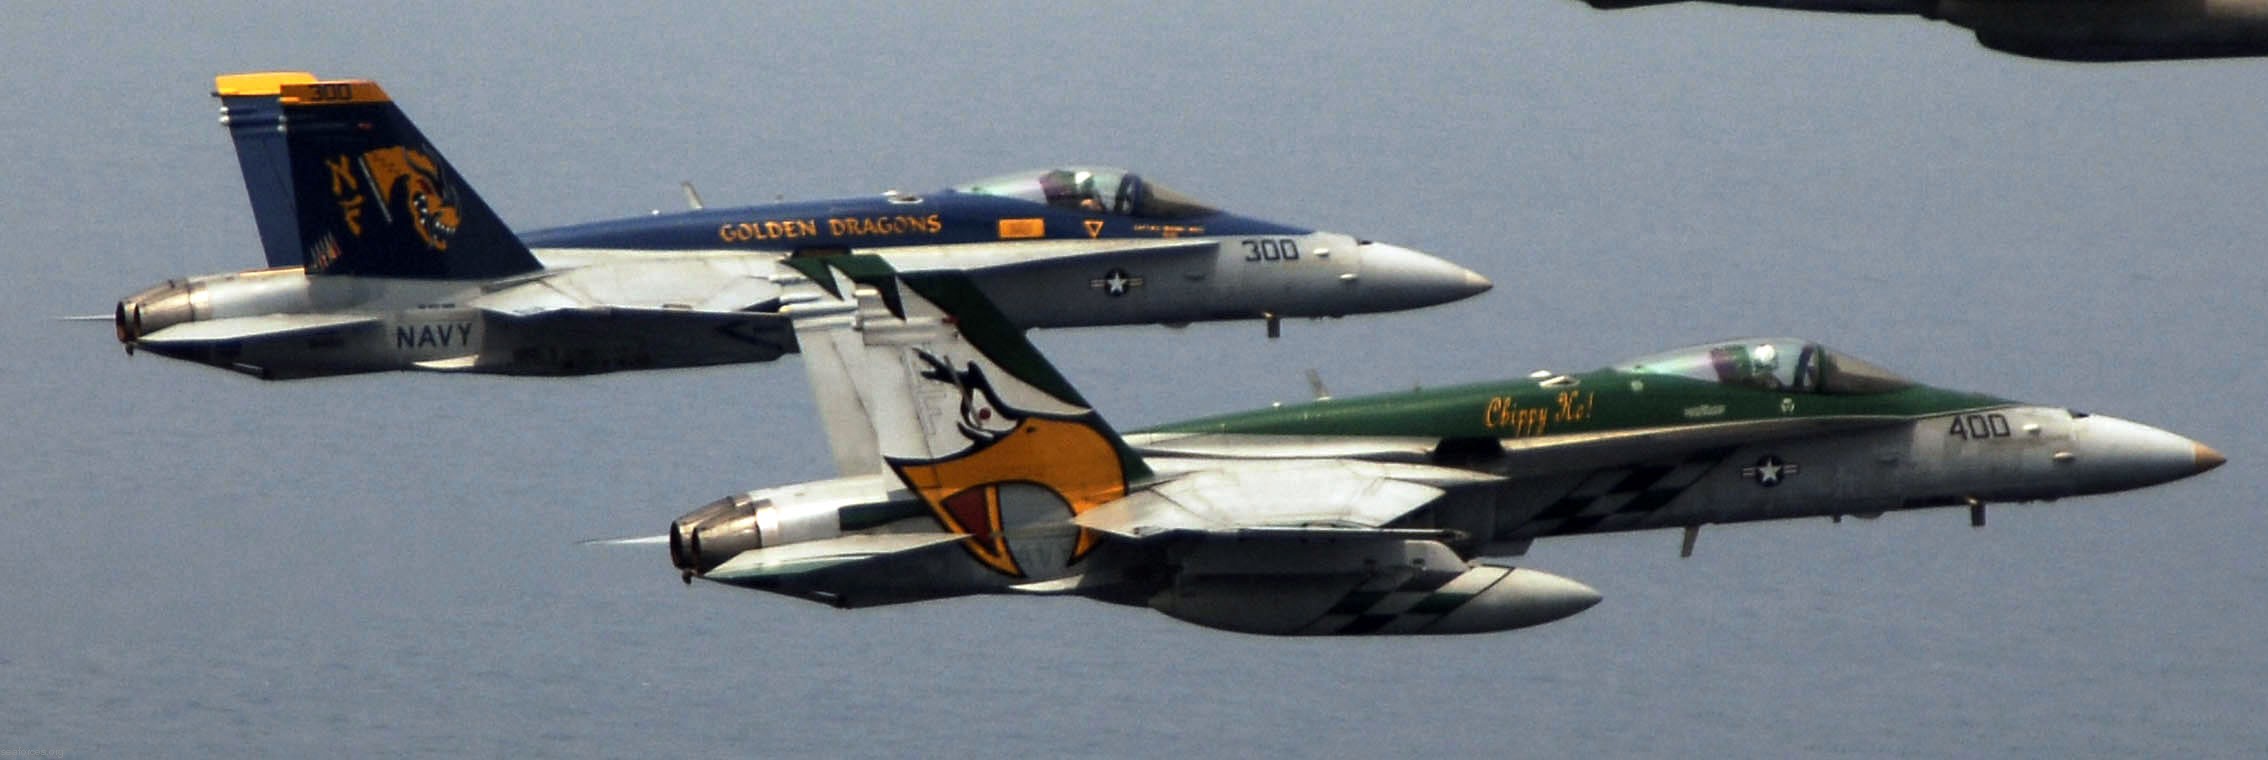 vfa-195 dambusters strike fighter squadron navy f/a-18c hornet carrier air wing cvw-5 uss kitty hawk cv-63 97